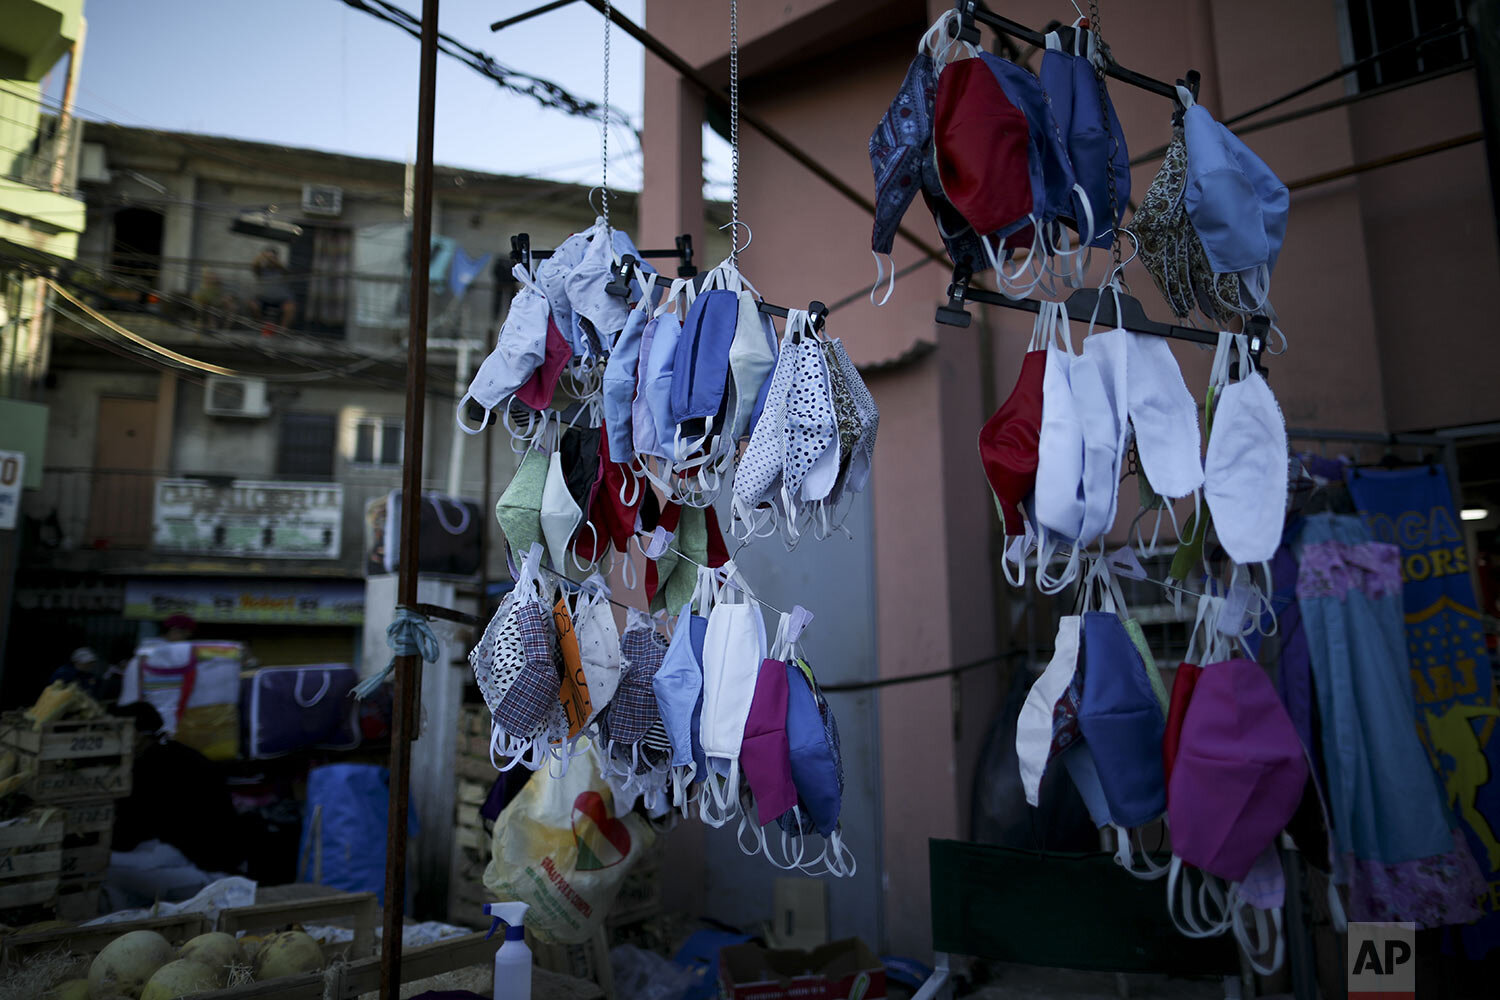  Face masks hang for sale in “Villa 31” in Buenos Aires, Argentina, Friday, May 1, 2020. (AP Photo/Natacha Pisarenko) 